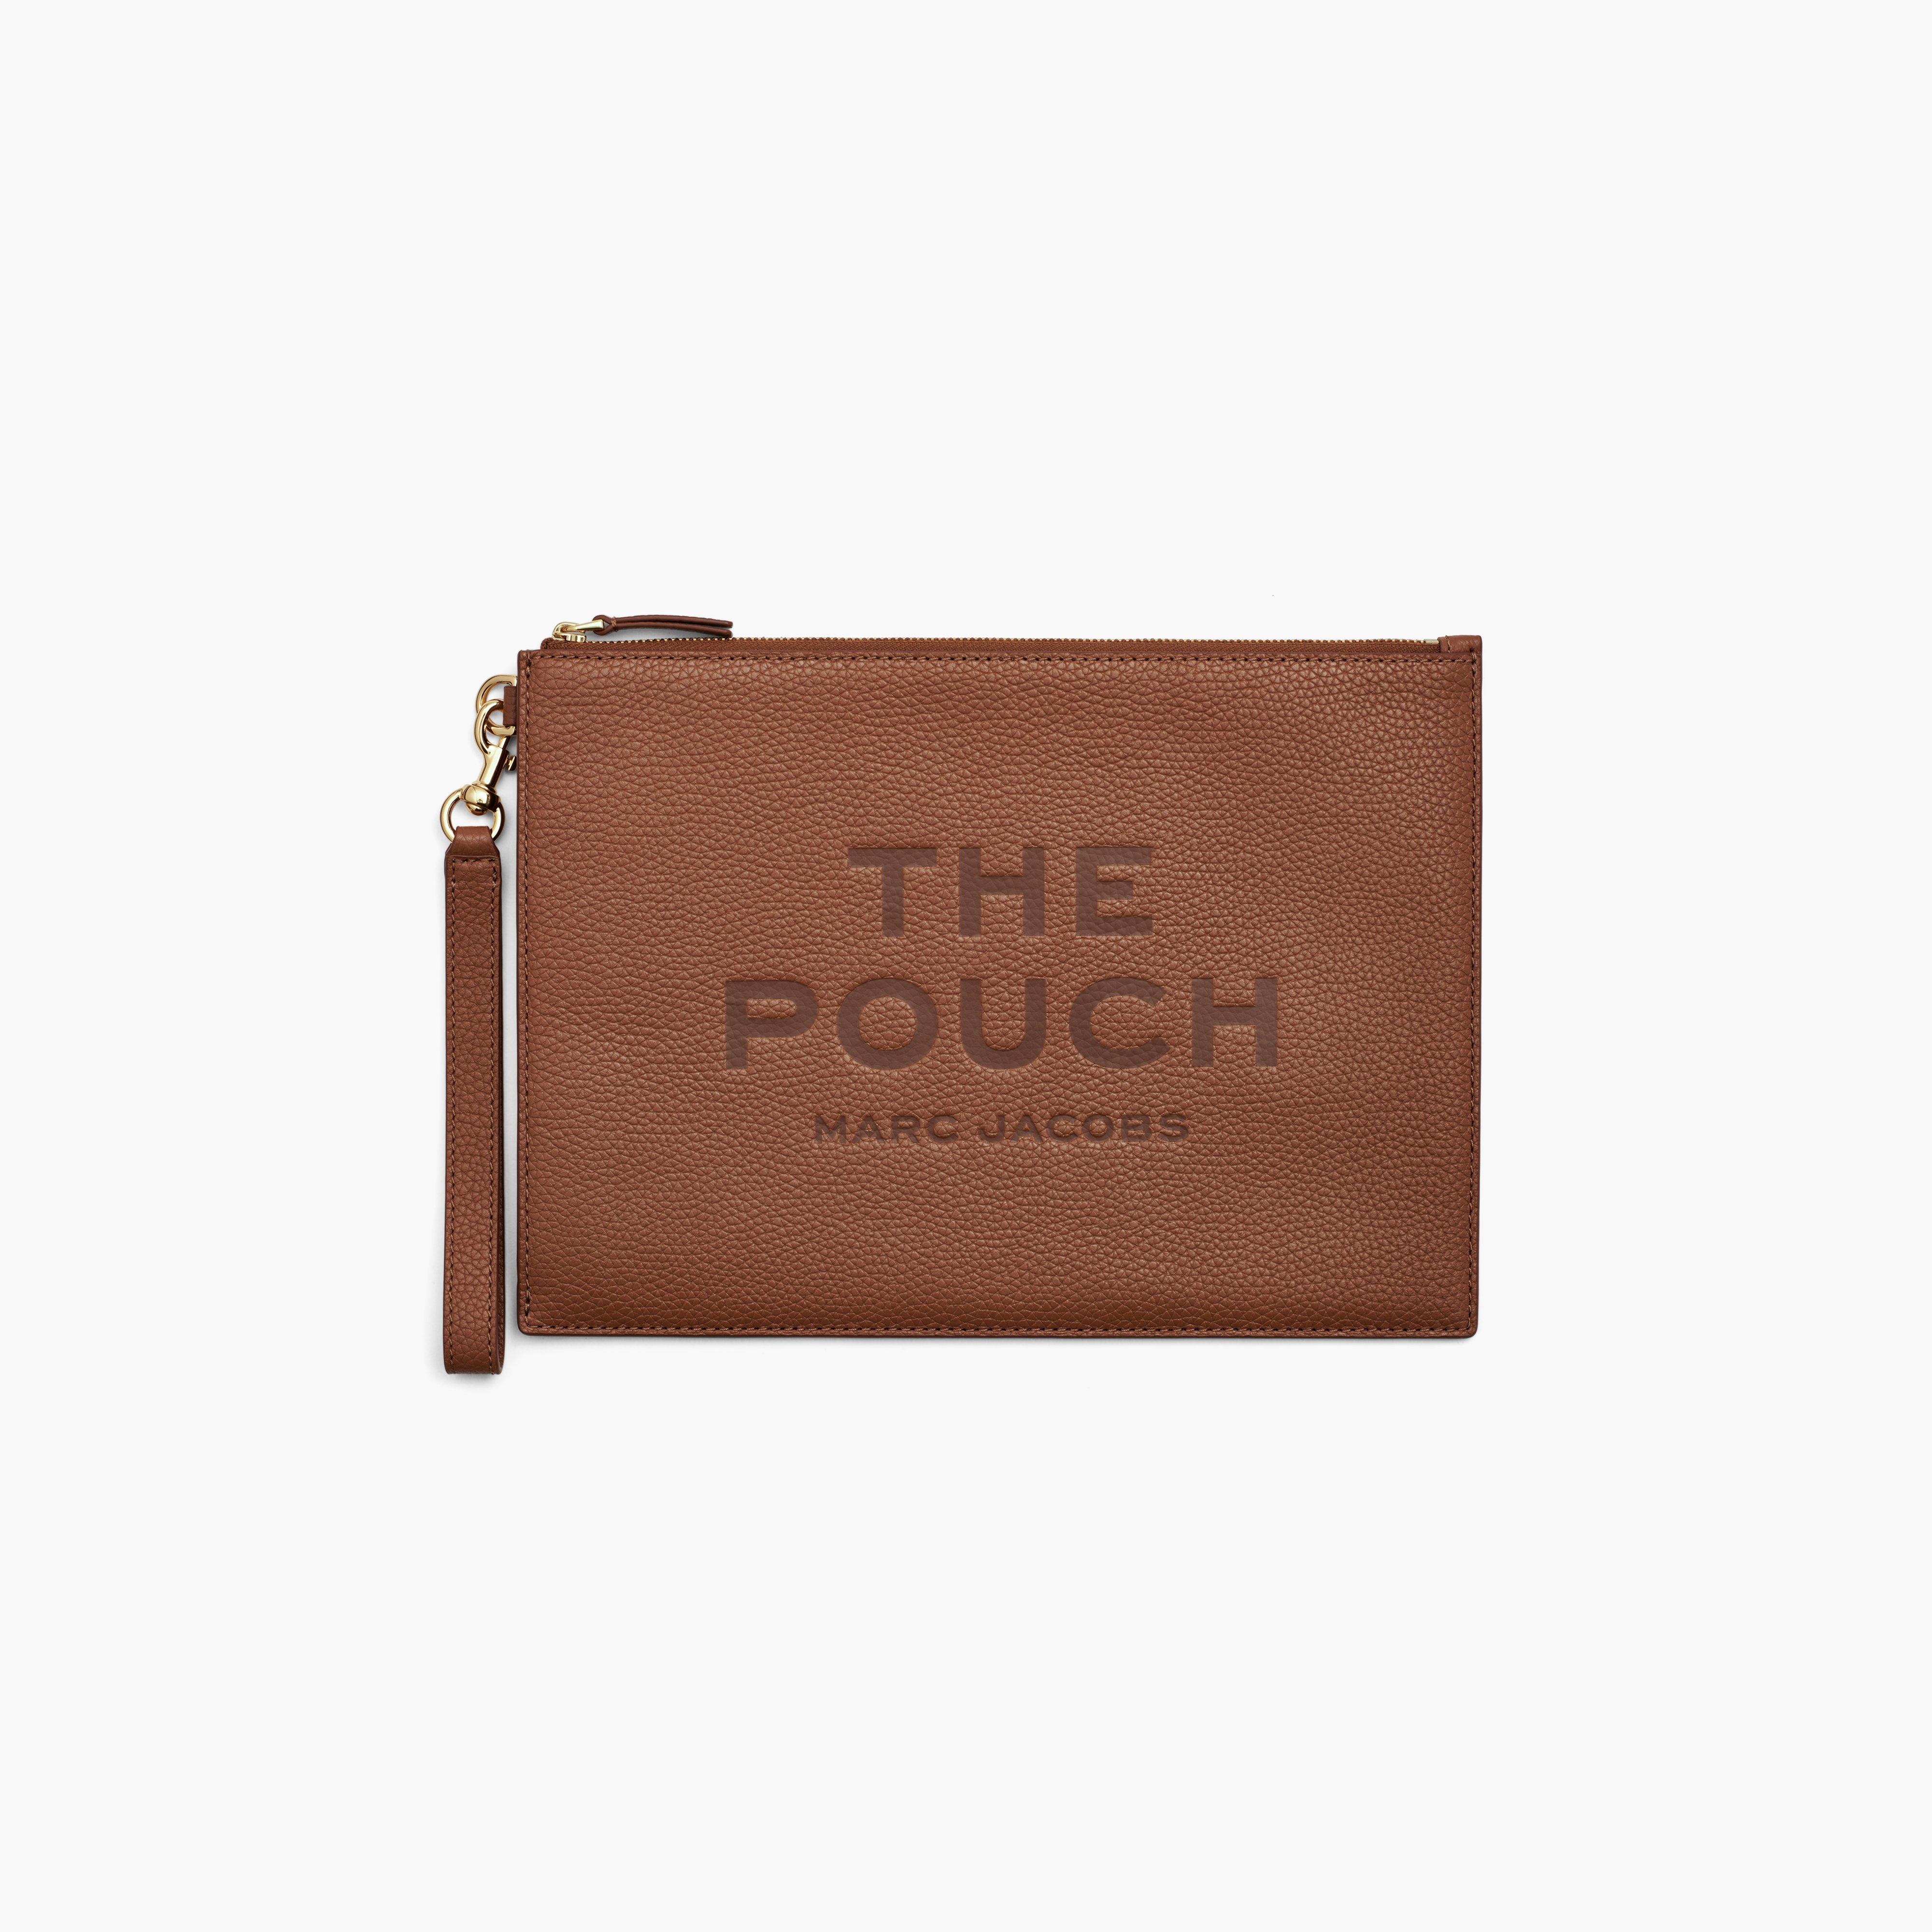 Marc by Marc jacobs The Leather Large Pouch,ARGAN OIL